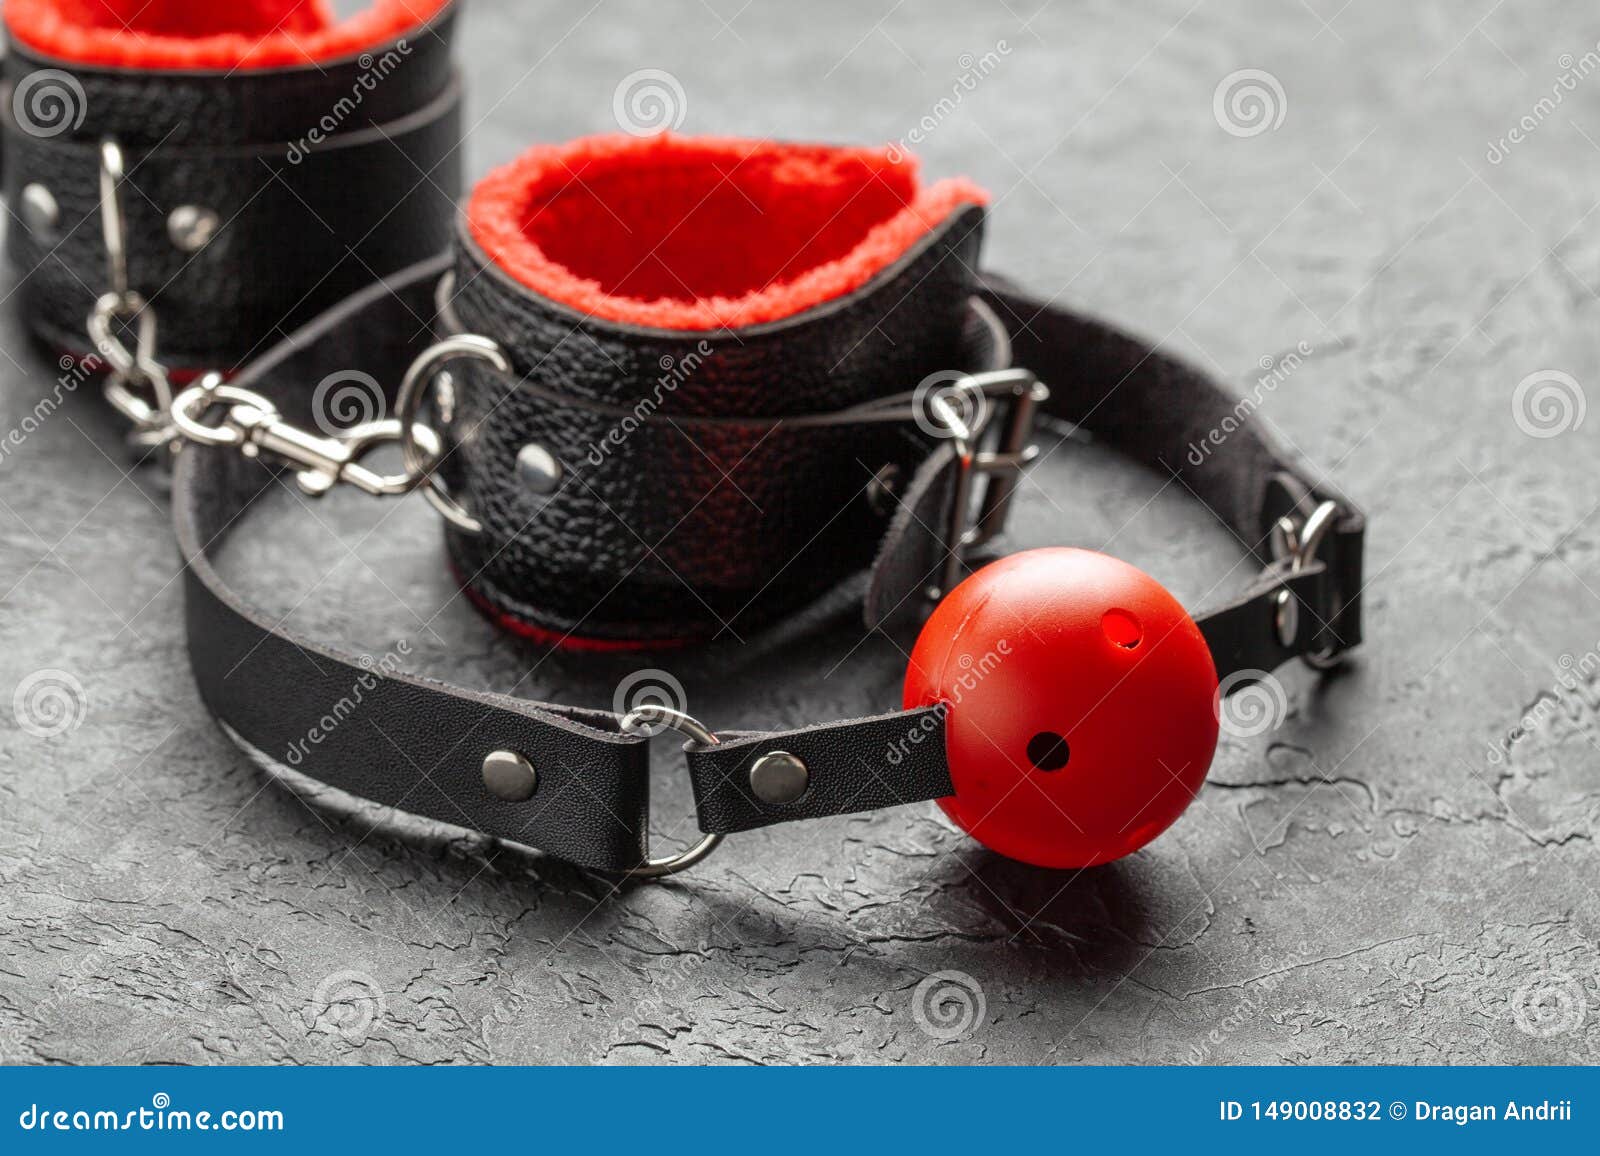 Bdsm Sex Toys For Adults Gag With Red Ball And Handcuffs